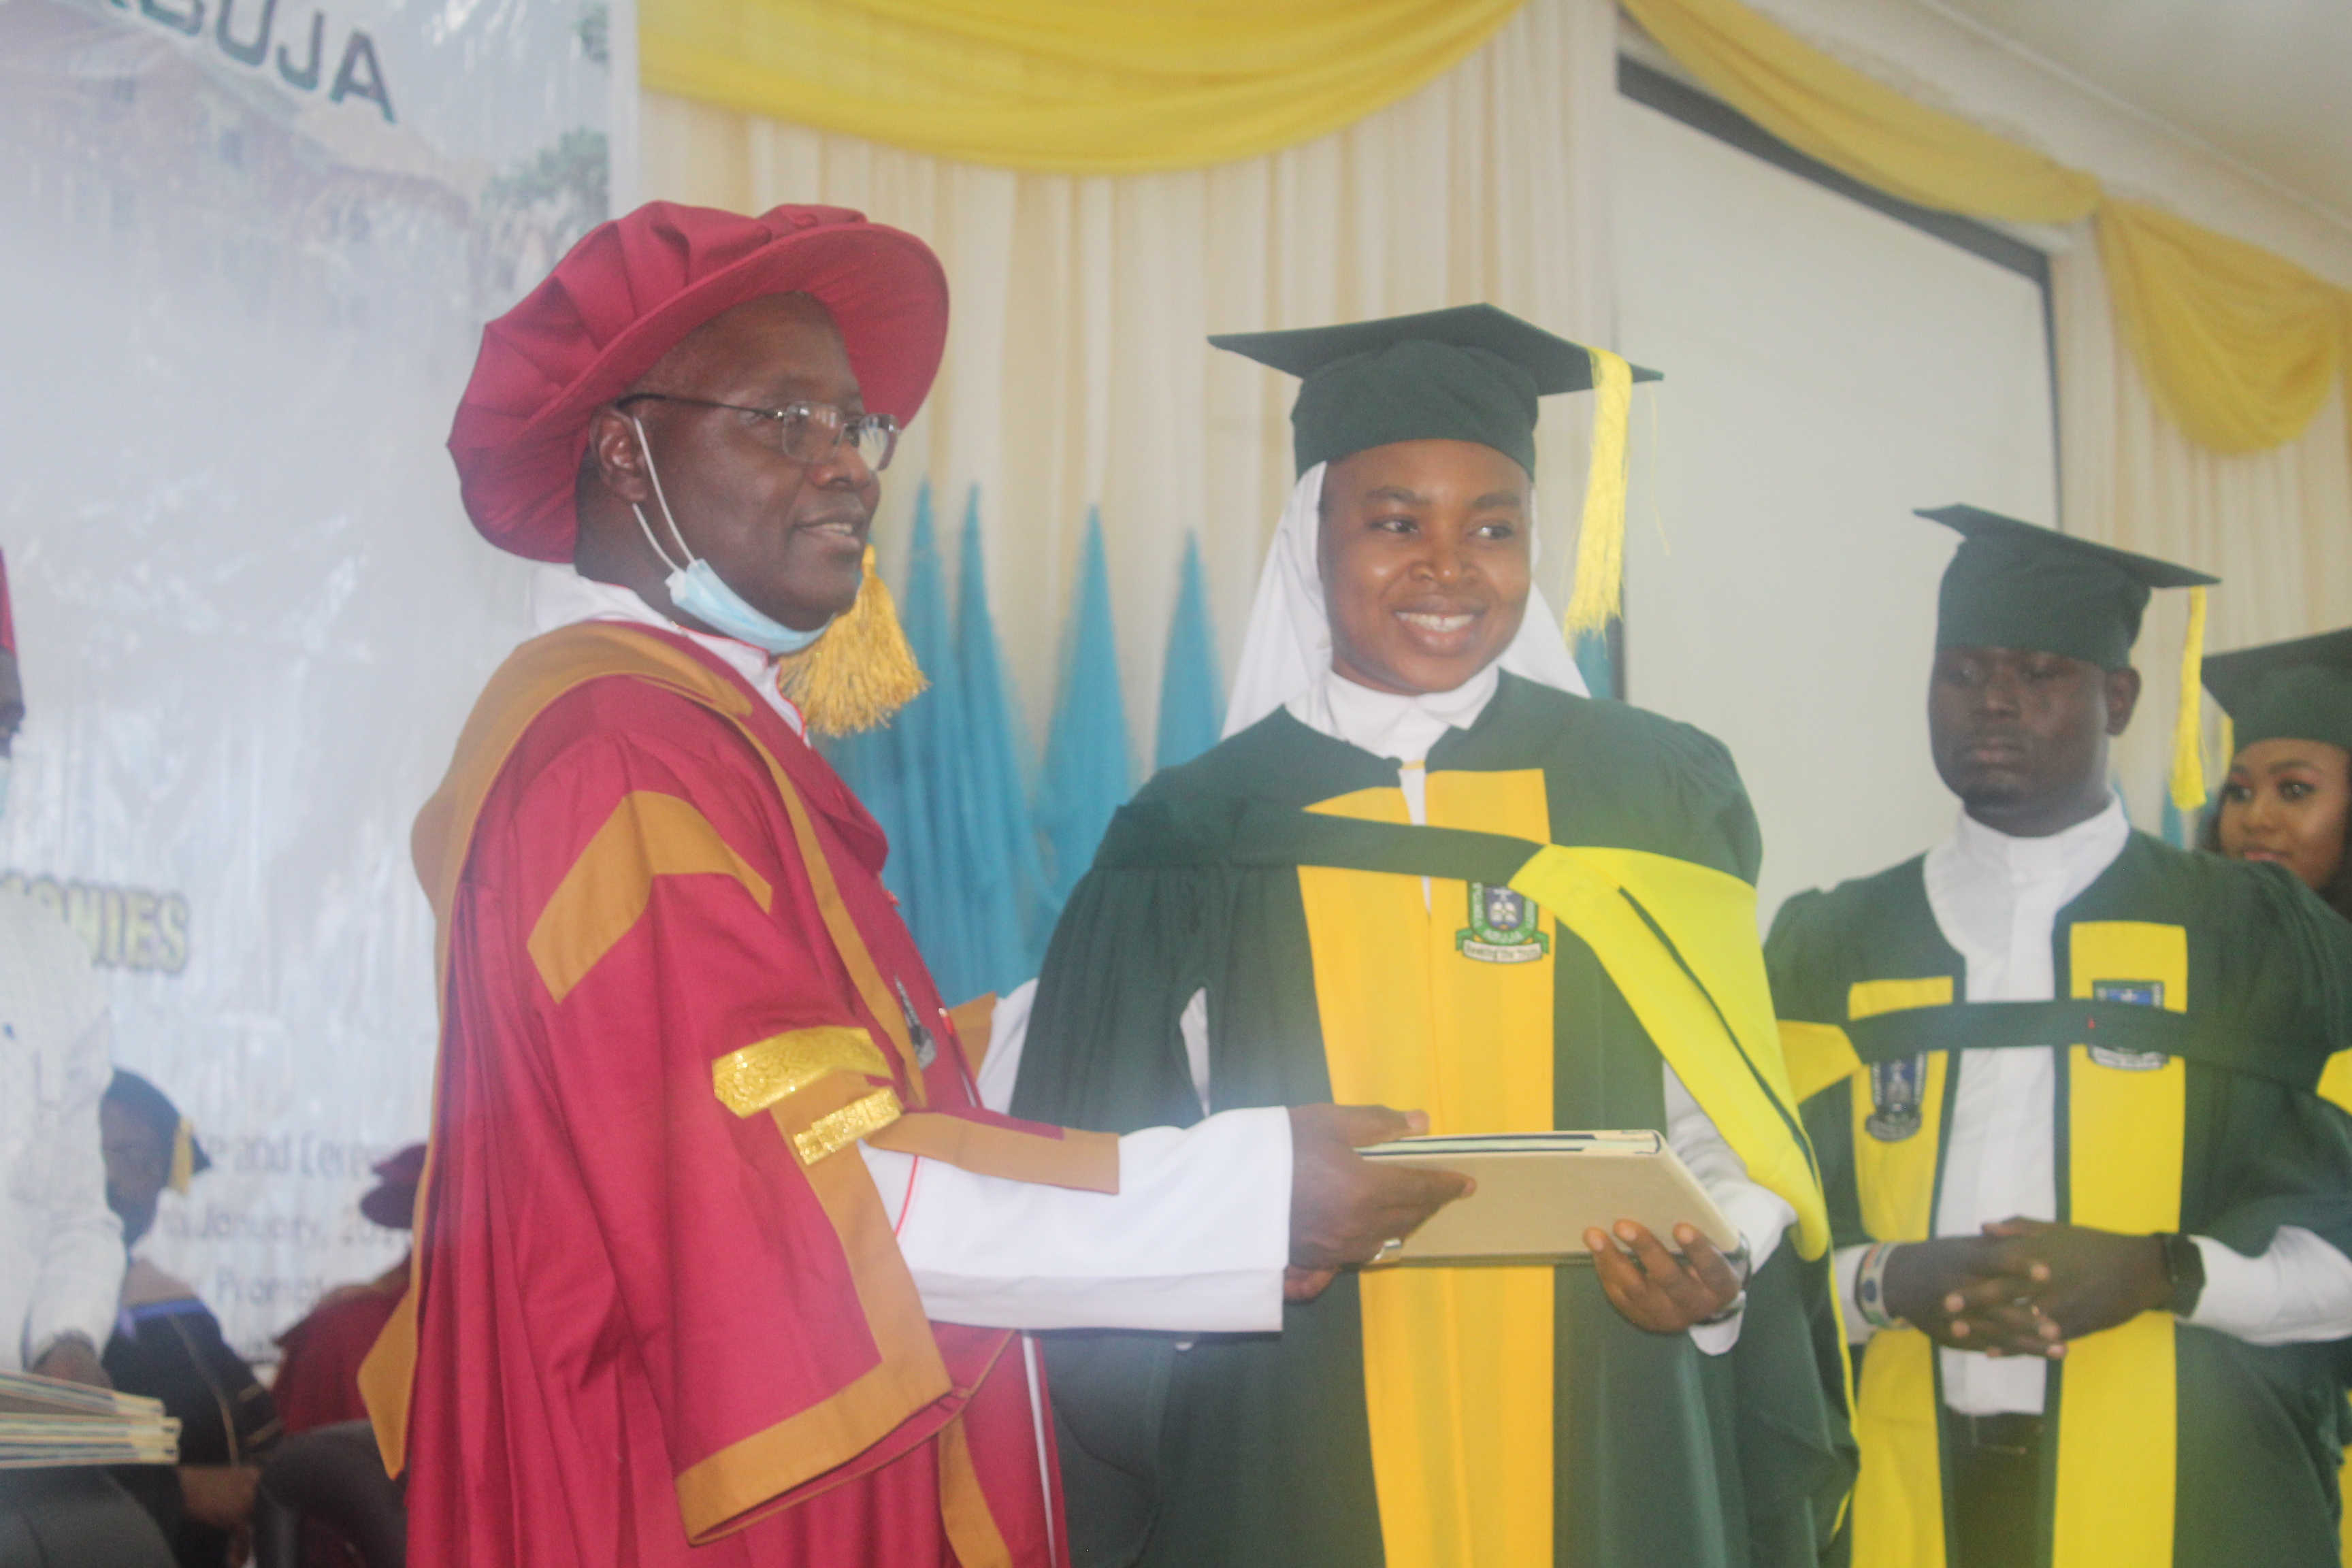 Sr. Anthonia's educational journey took perseverance, strength and faith, which all paid off. Here she is on graduation day at VERITAS.